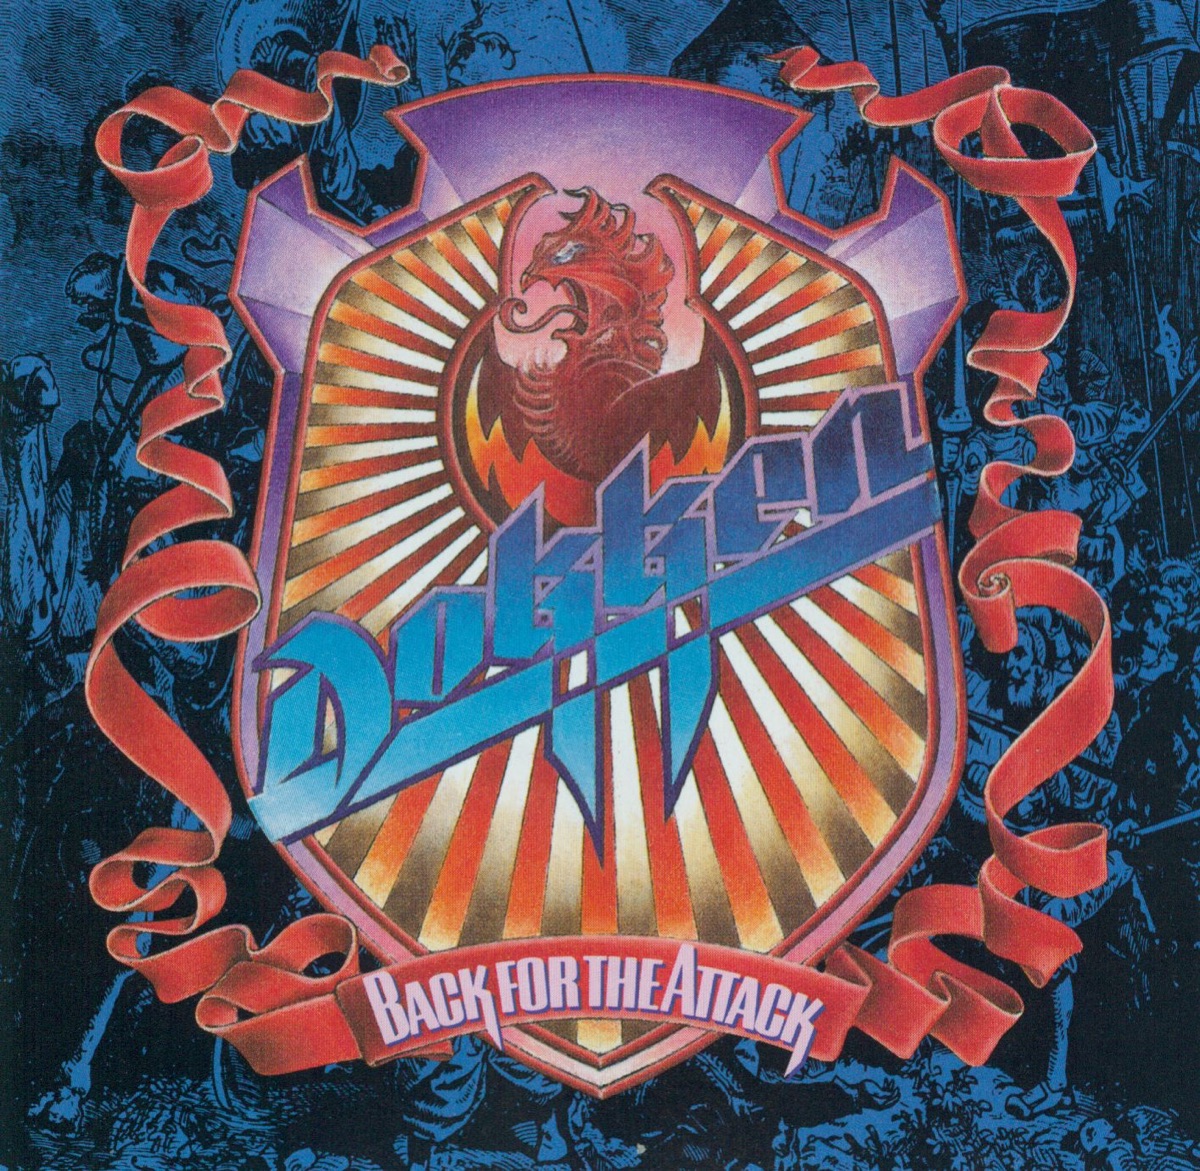 Breaking the Chains - Album by Dokken - Apple Music